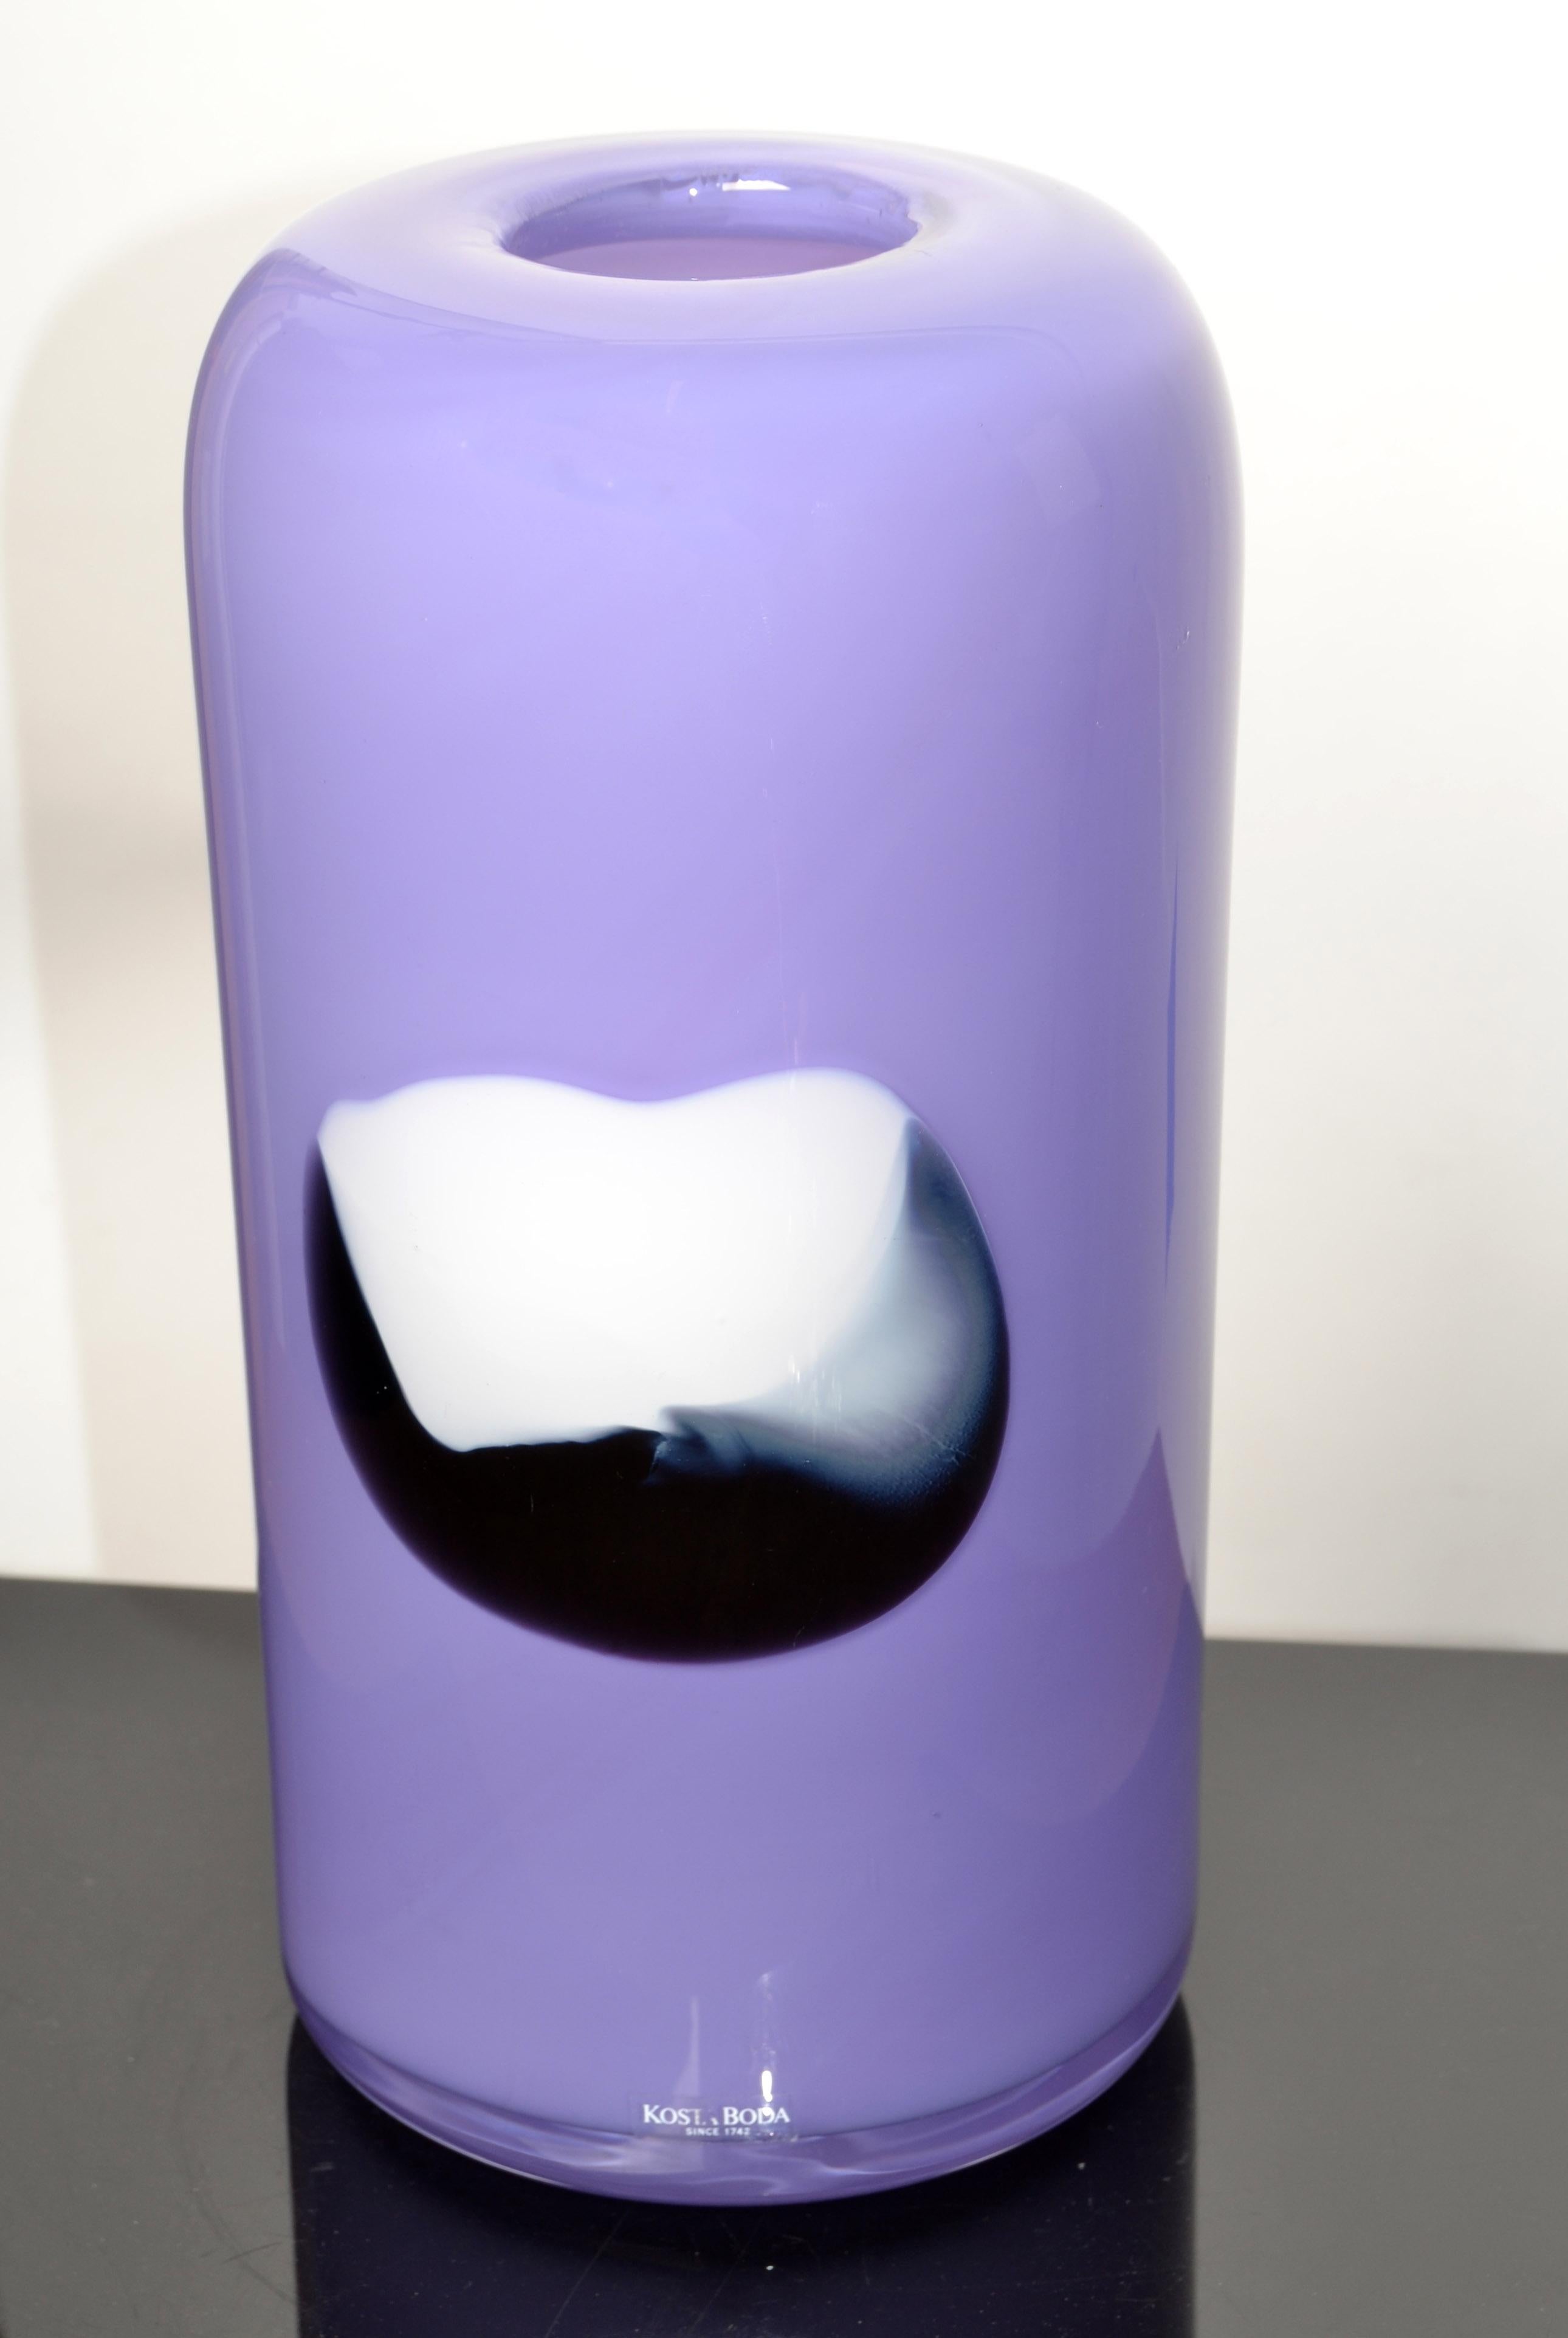 Light Purple Cylinder Art Glass Vase handmade by Gunnel Sahlin with abstract Black and white Center for Kosta Boda, Sweden.
Gunnel Sahlin was with Kosta Boda between 1986-2005, this piece is made circa 1990.
Encased with a clear Glass Layer and in